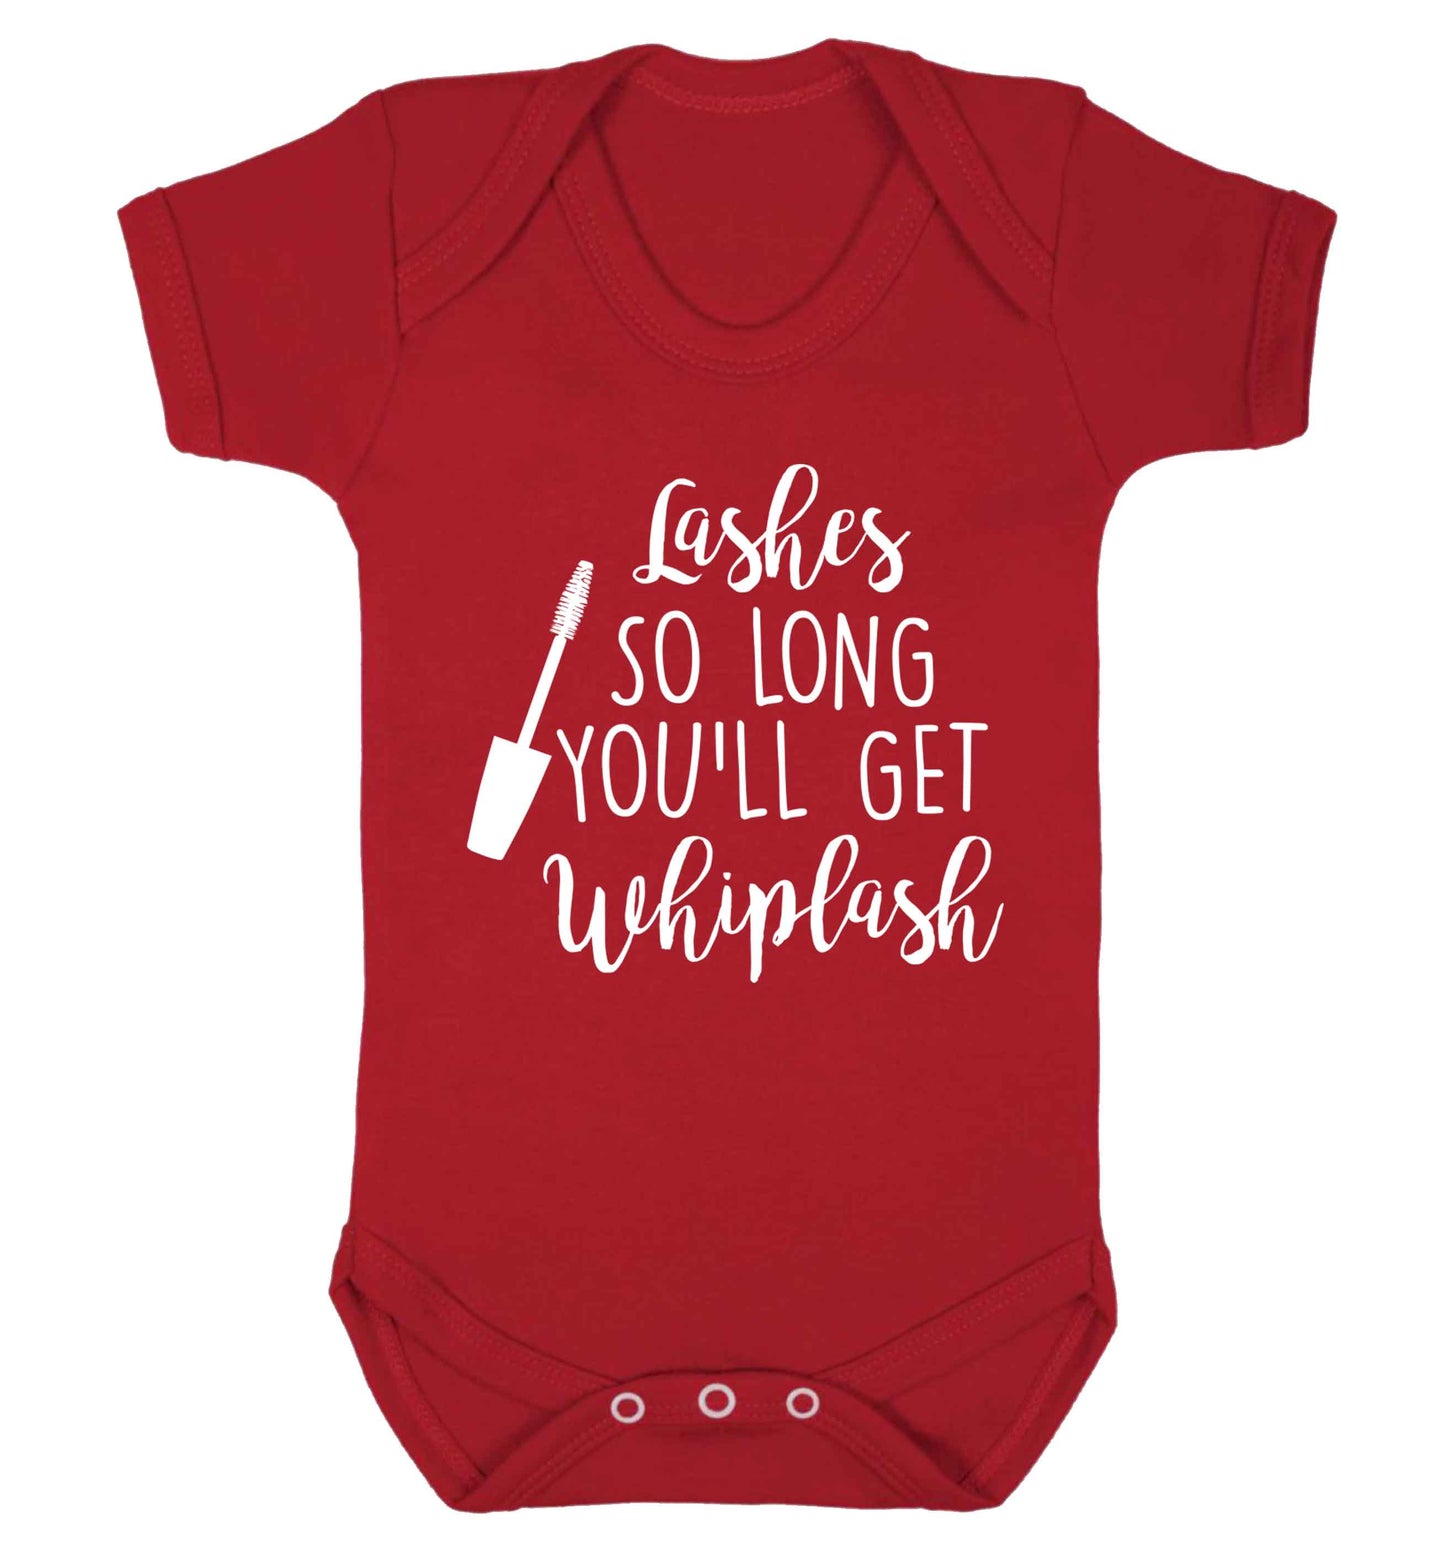 Lashes so long you'll get whiplash Baby Vest red 18-24 months